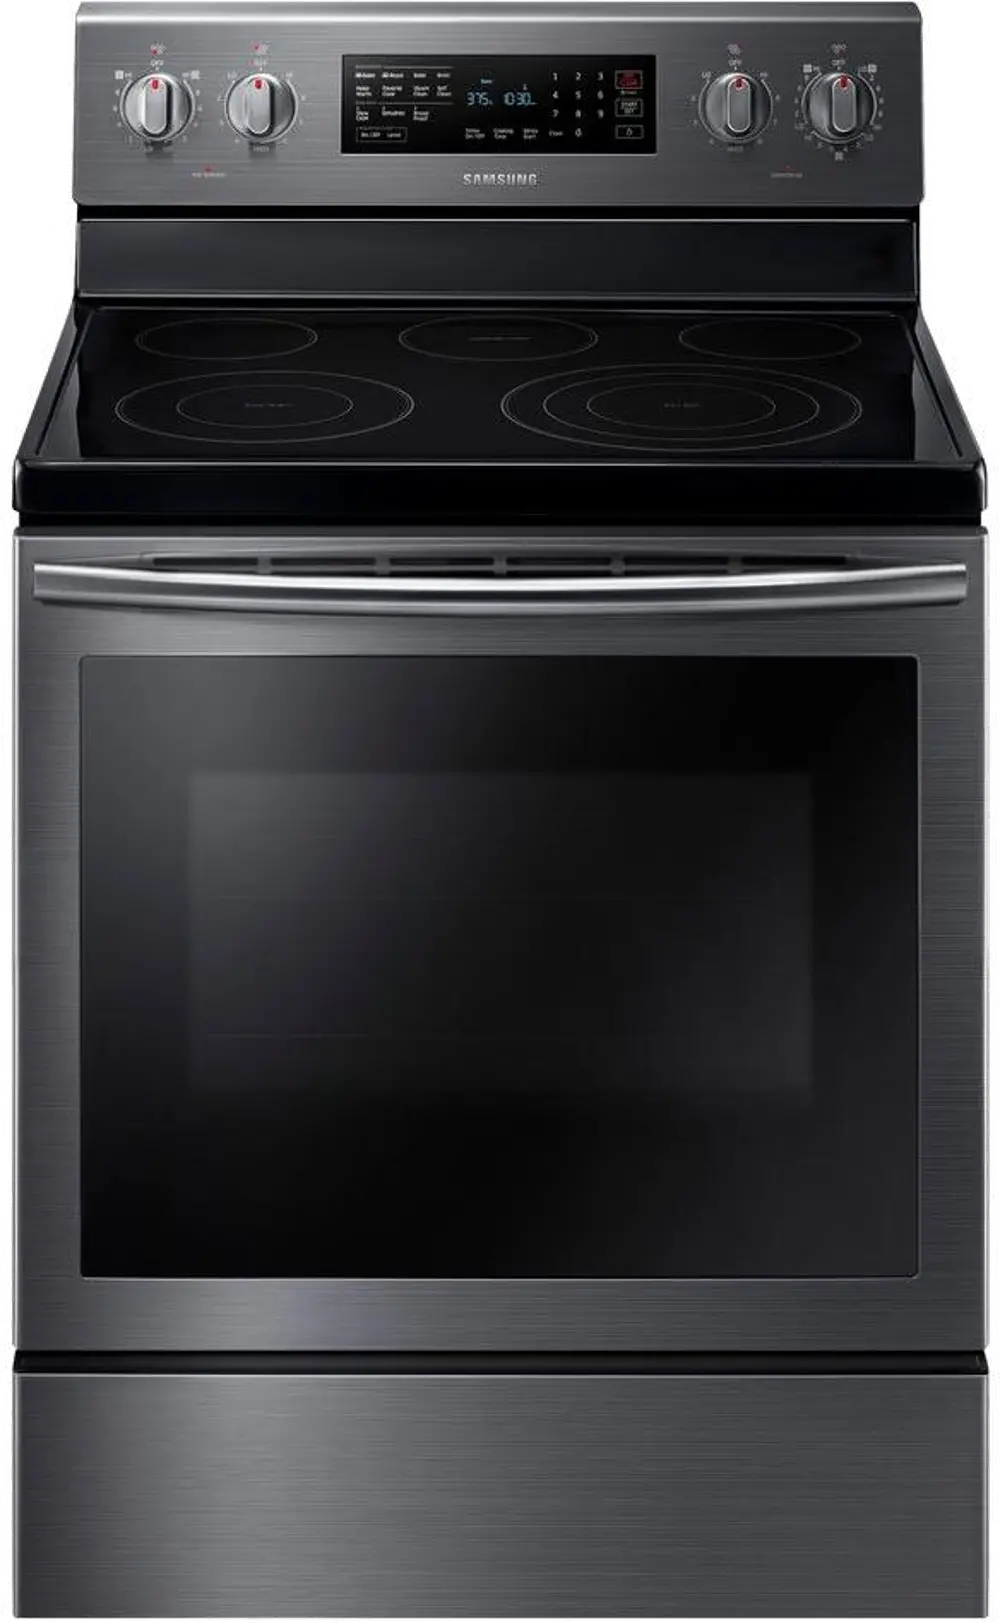 NE59J7630SG Samsung Slide-in Electric Range with True Convection - 5.9 cu. ft. Black Stainless Steel-1